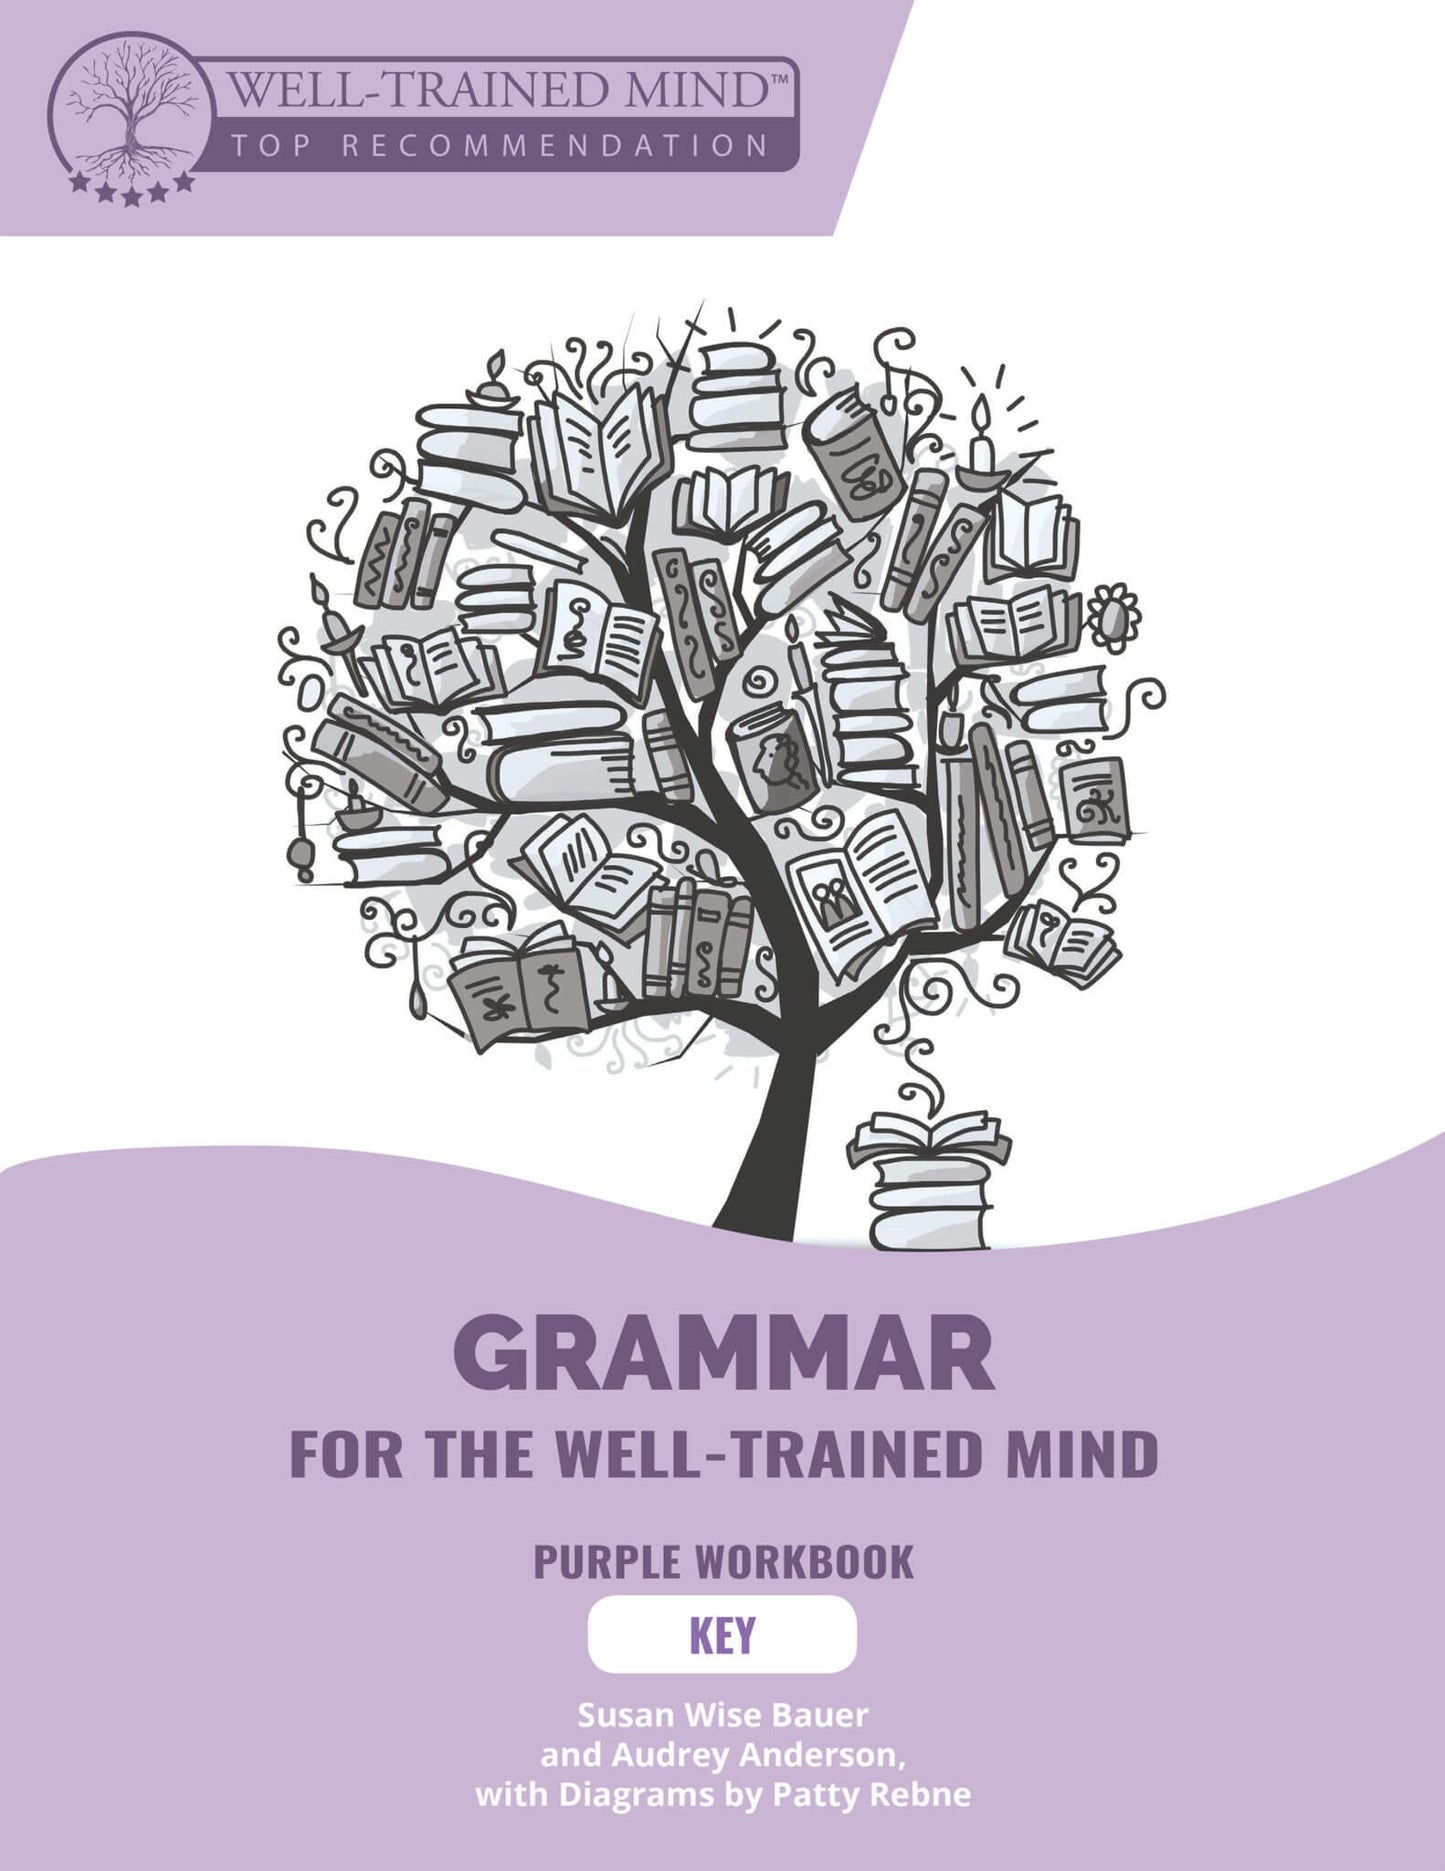 Grammar for the Well-Trained Mind, Key to the Purple Workbook (C373)